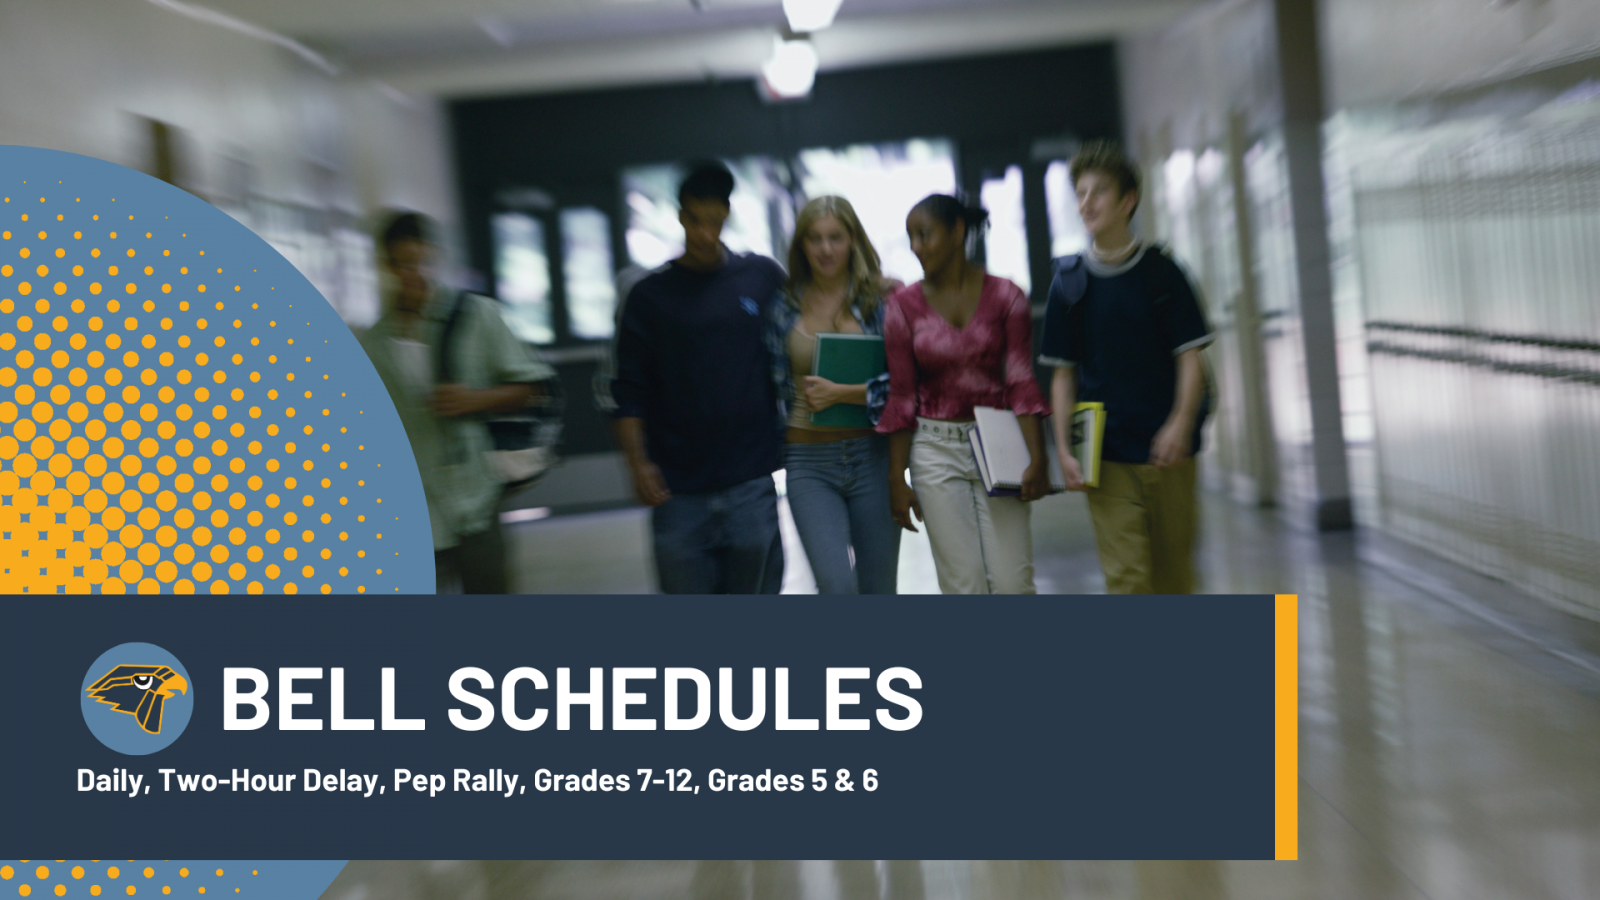 Students walk in a hallway past lockers. Text: Bell Schedules: Daily, Two-Hour Delay, Pep Rally, Grades 7-12, Grades 5 & 6"